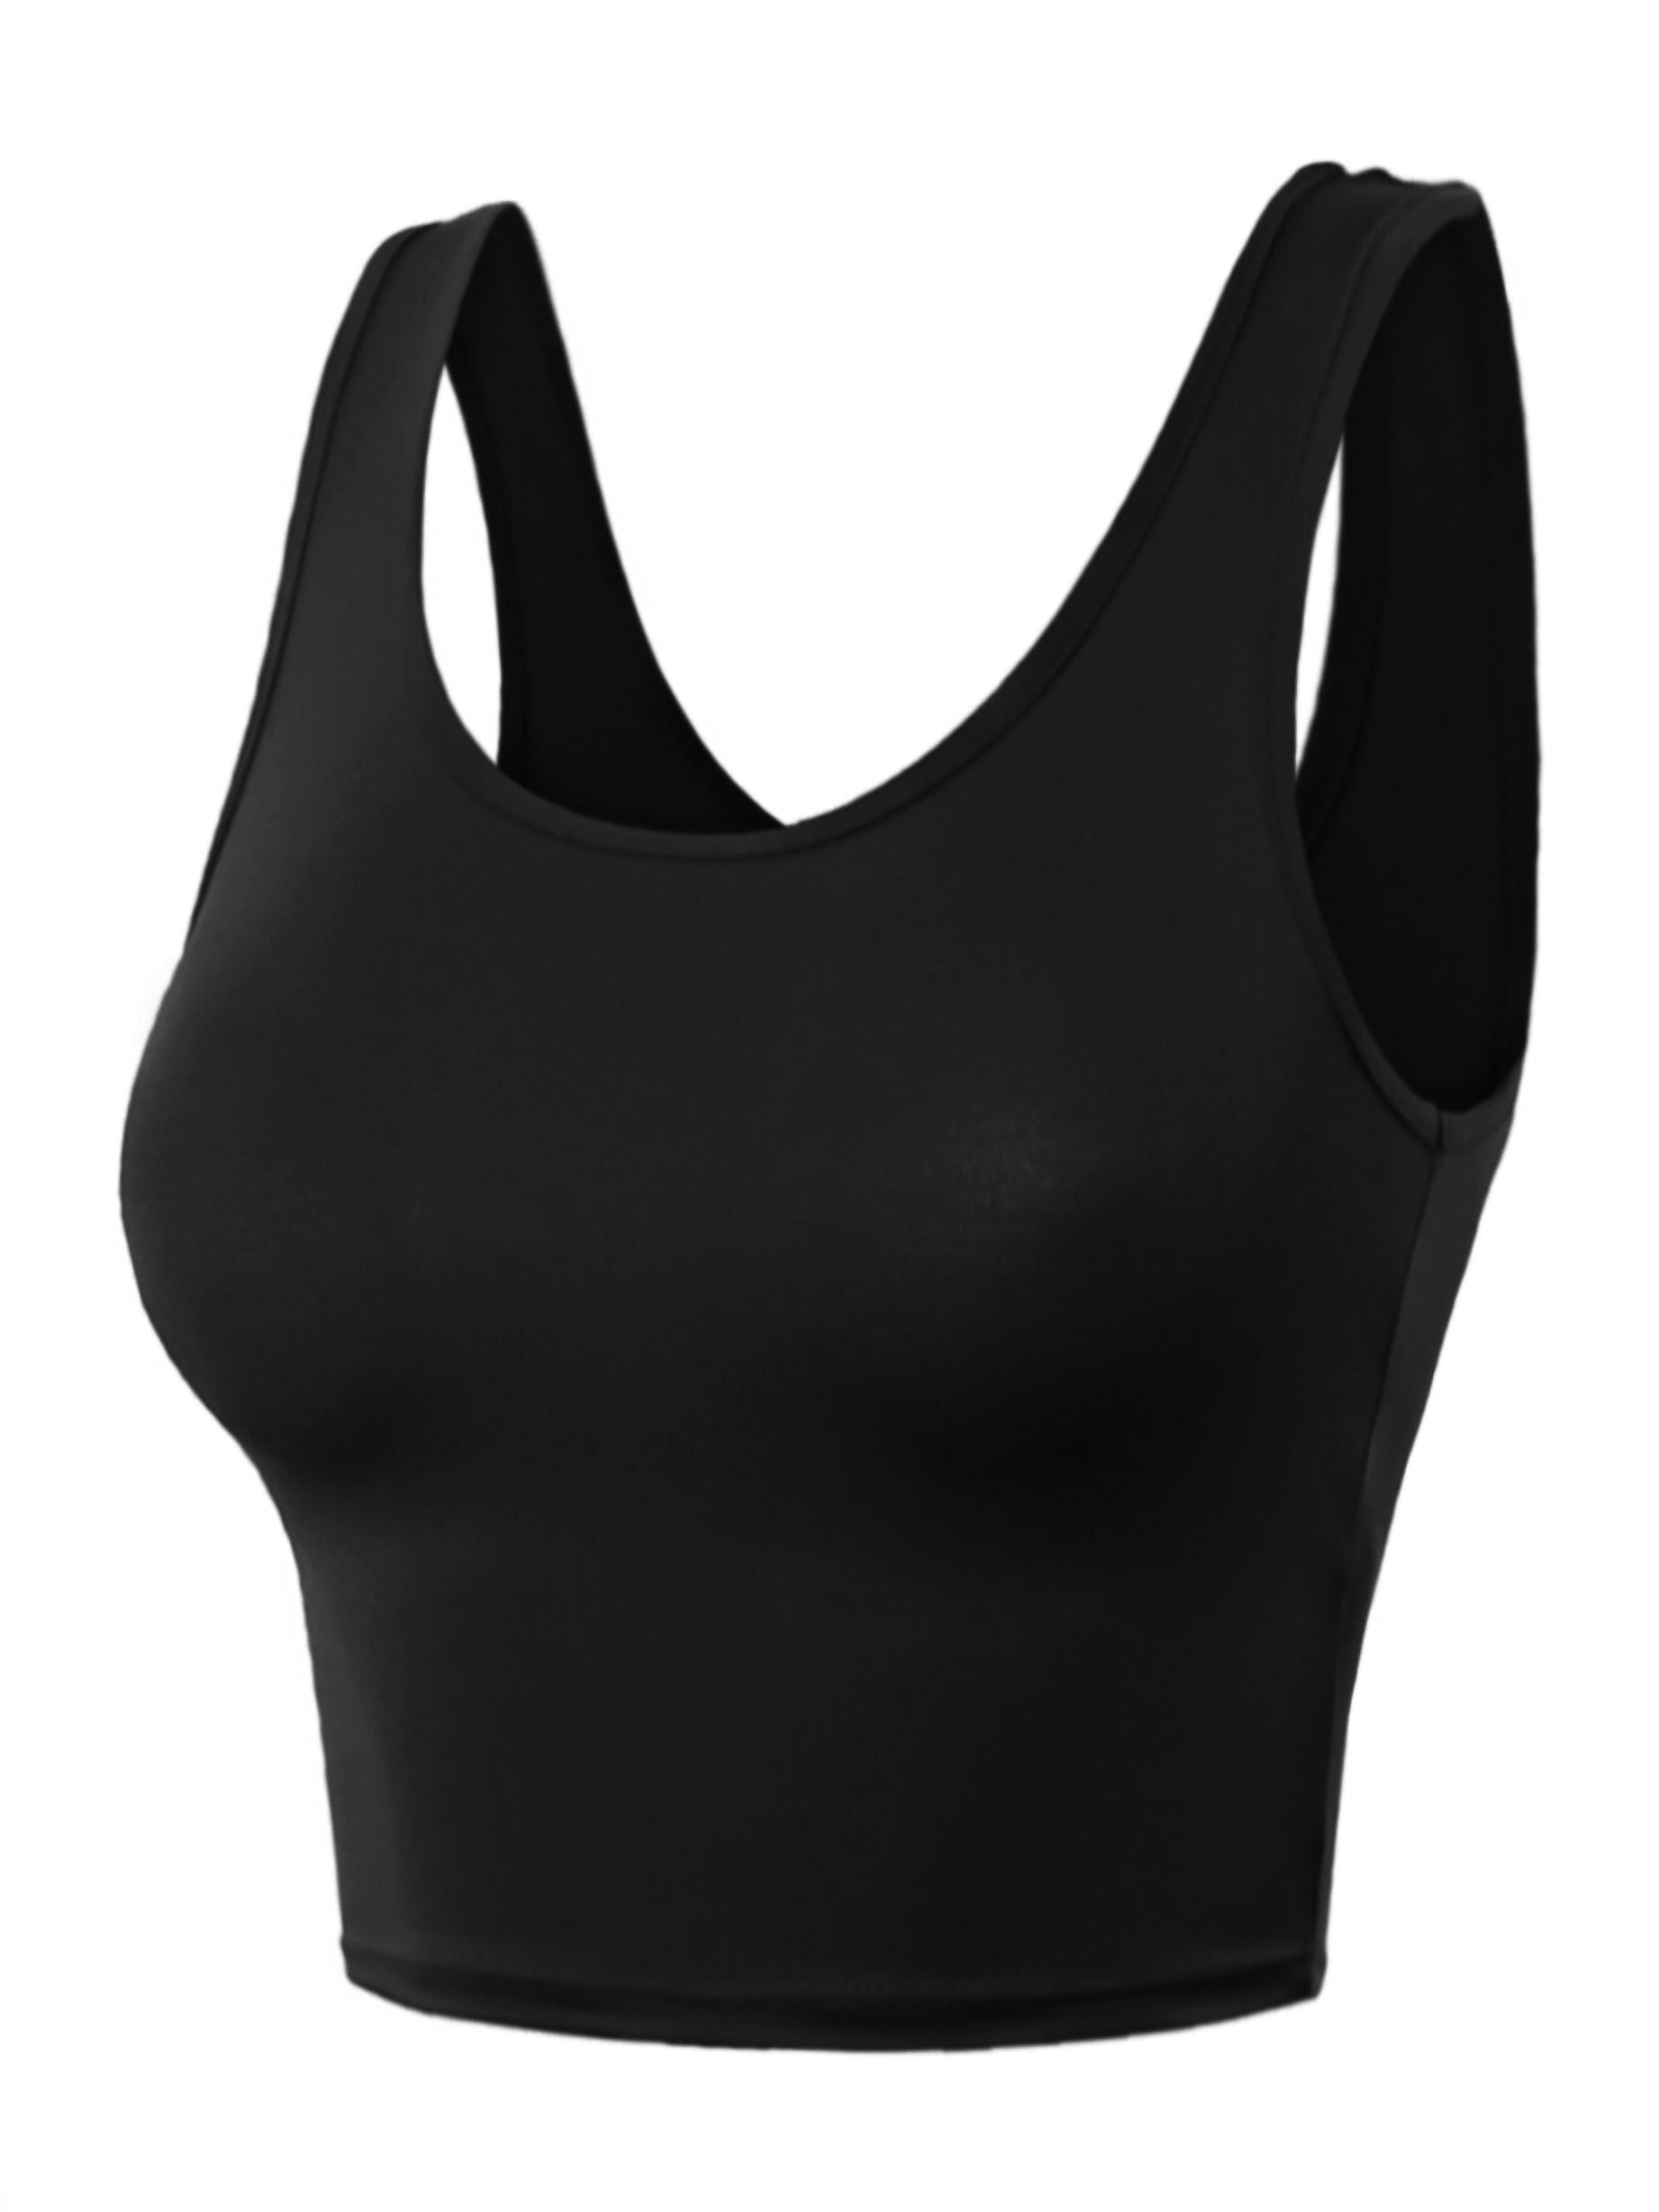 A2Y Women's Fitted Rayon Scoop Neck Sleeveless Crop Tank Top Black S 